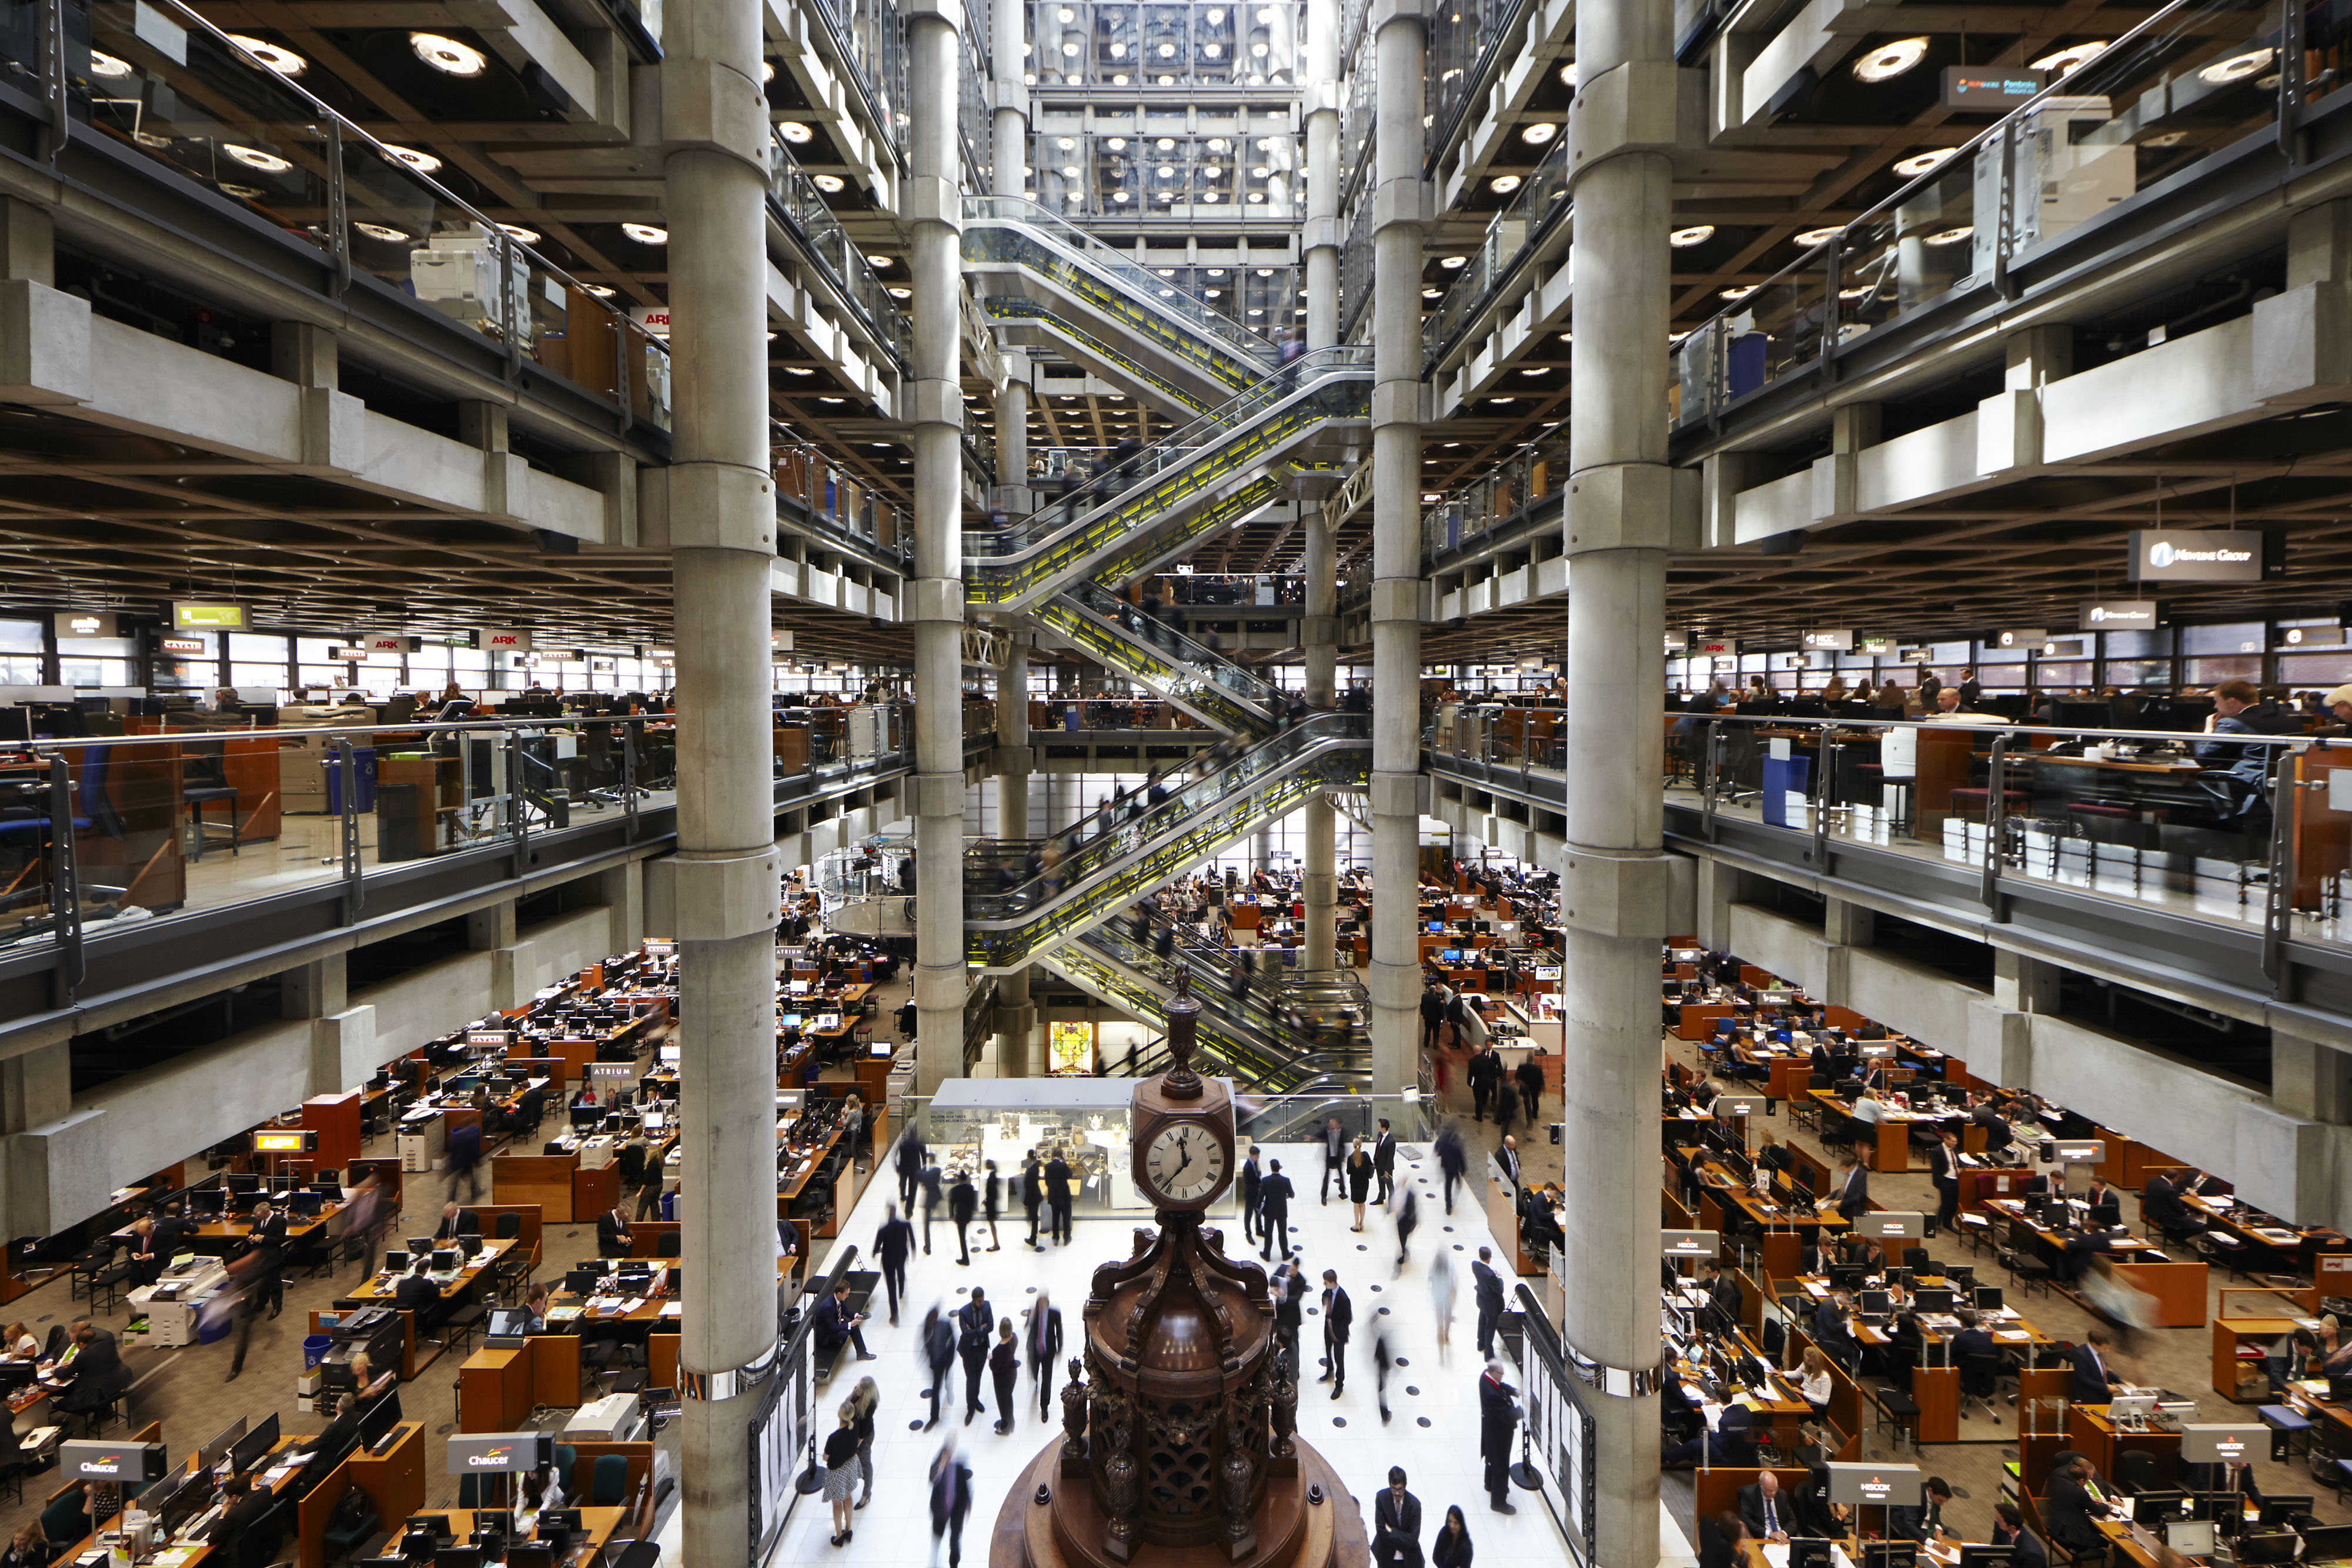 The underwriting room in the Lloyd’s Building